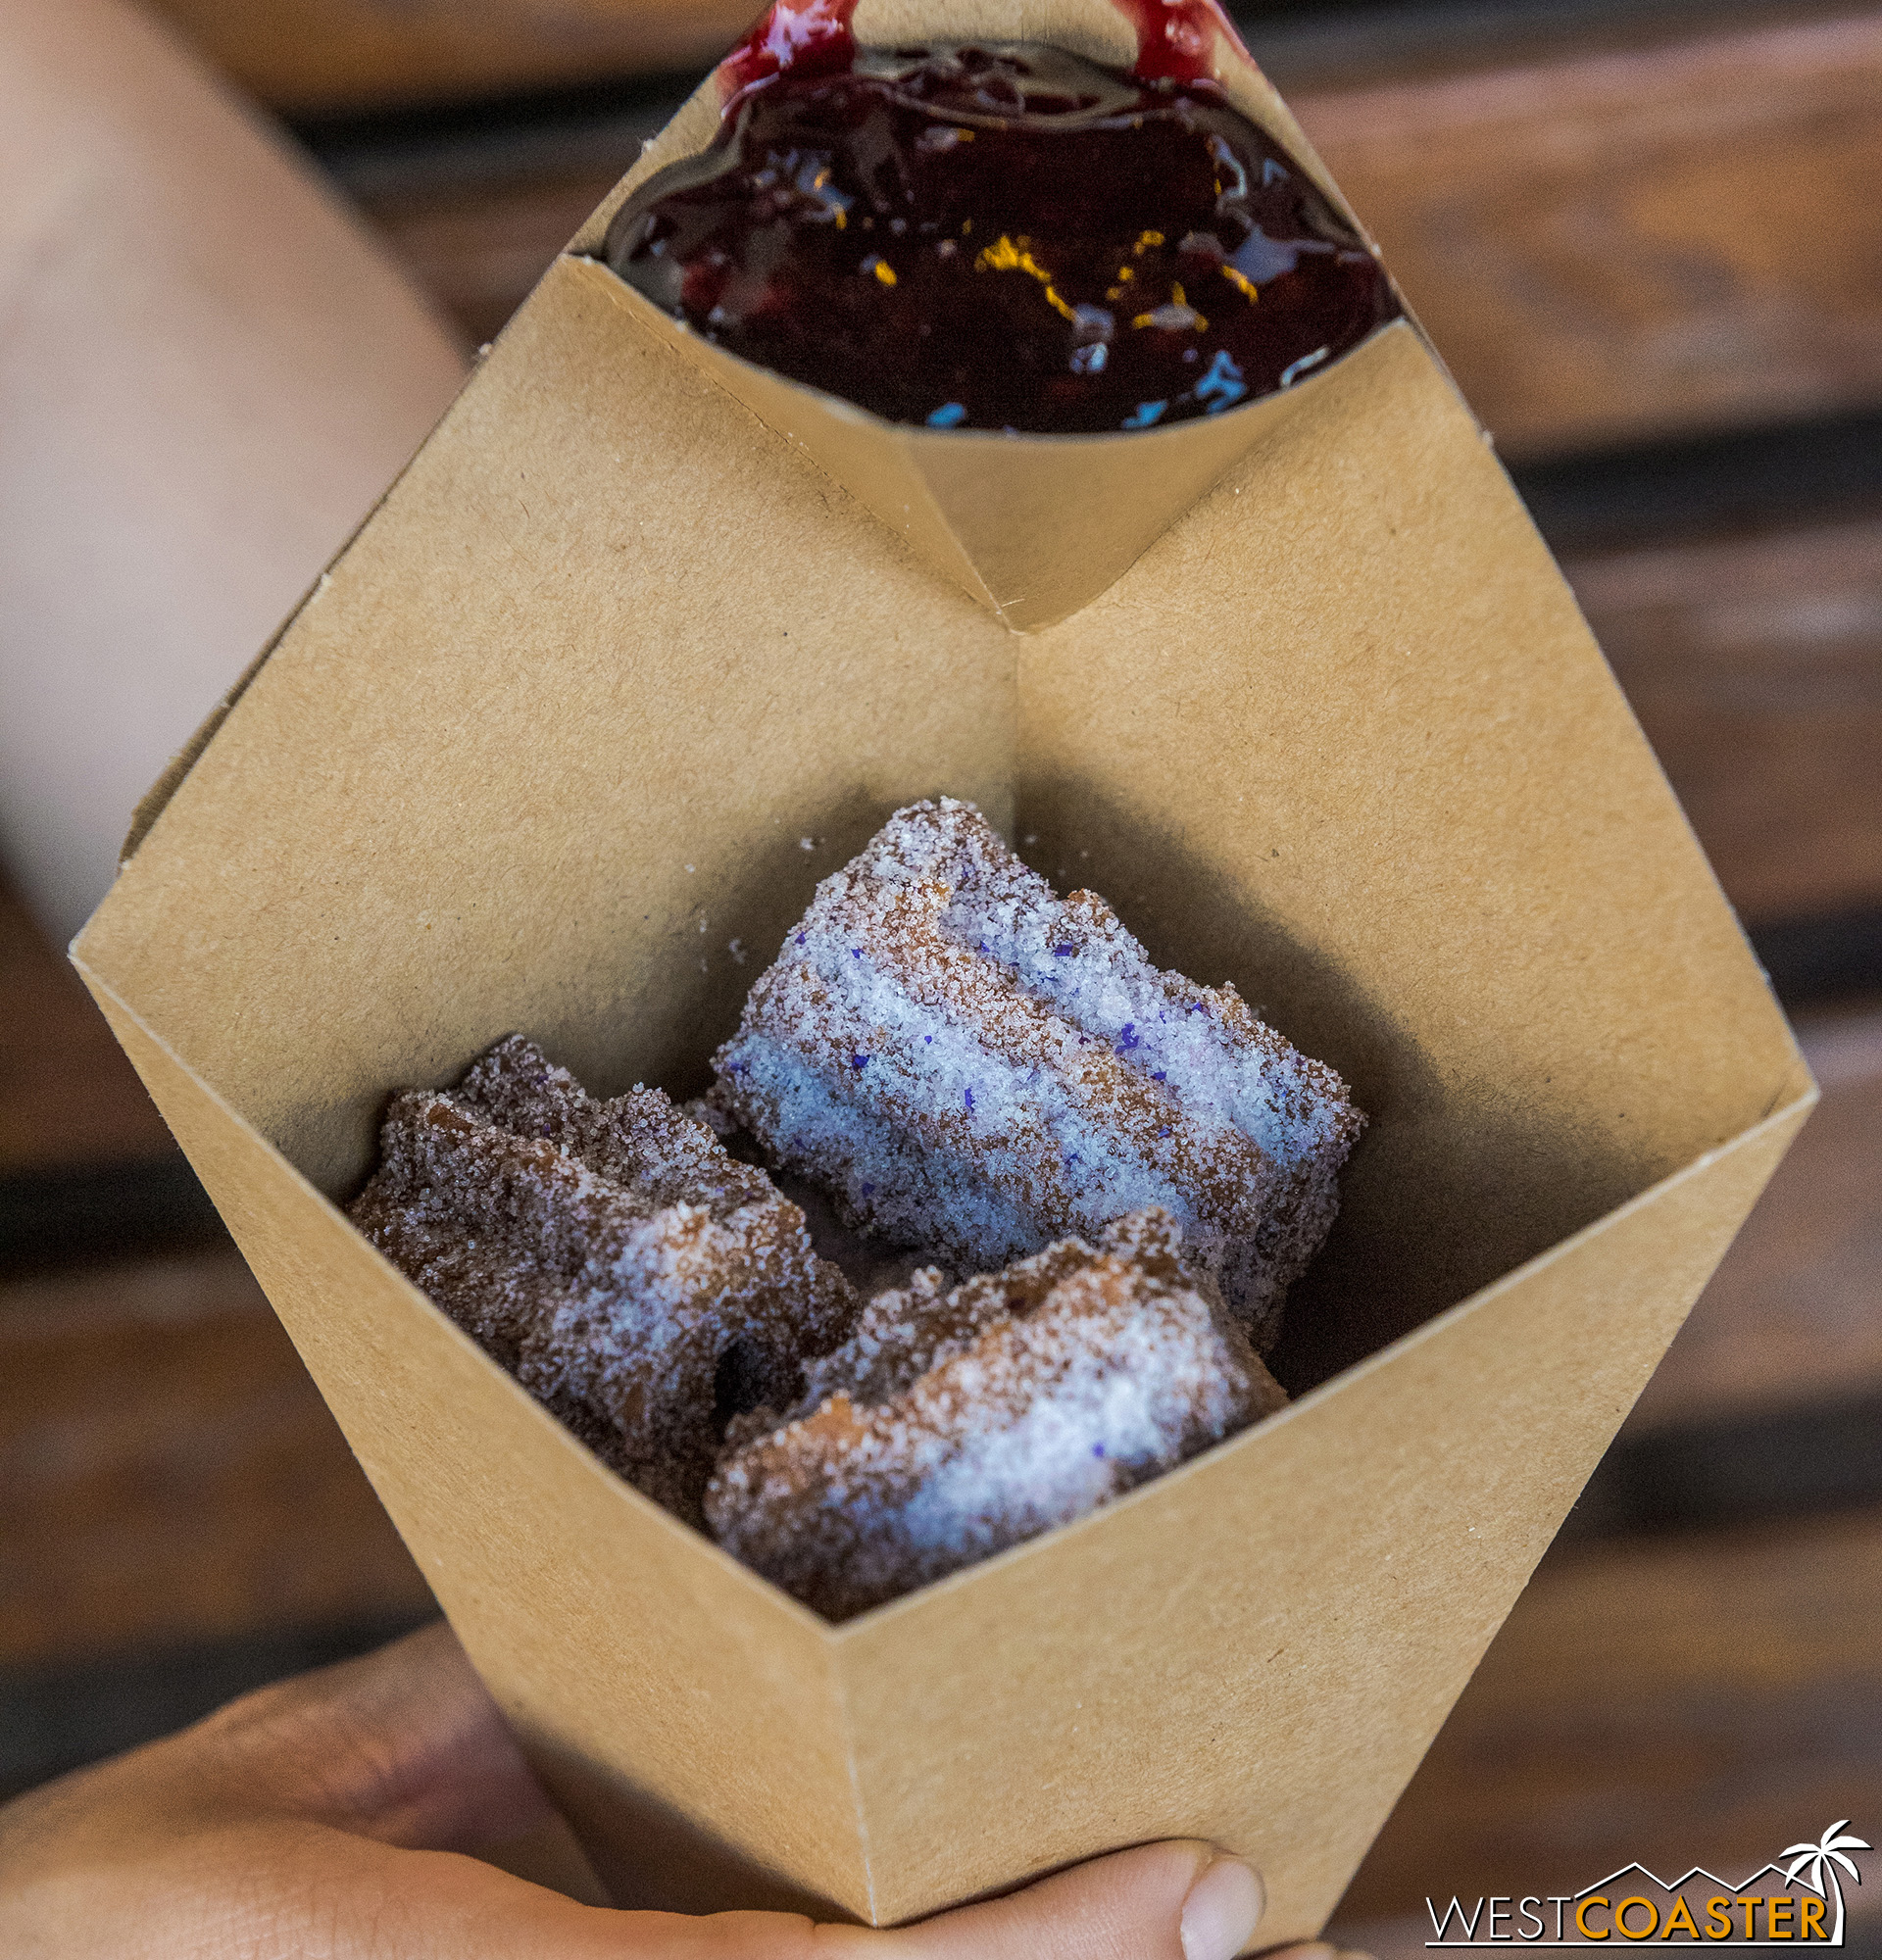  Boysenberry Churro Bites are available in Ghost Town’s Churro Factory. 